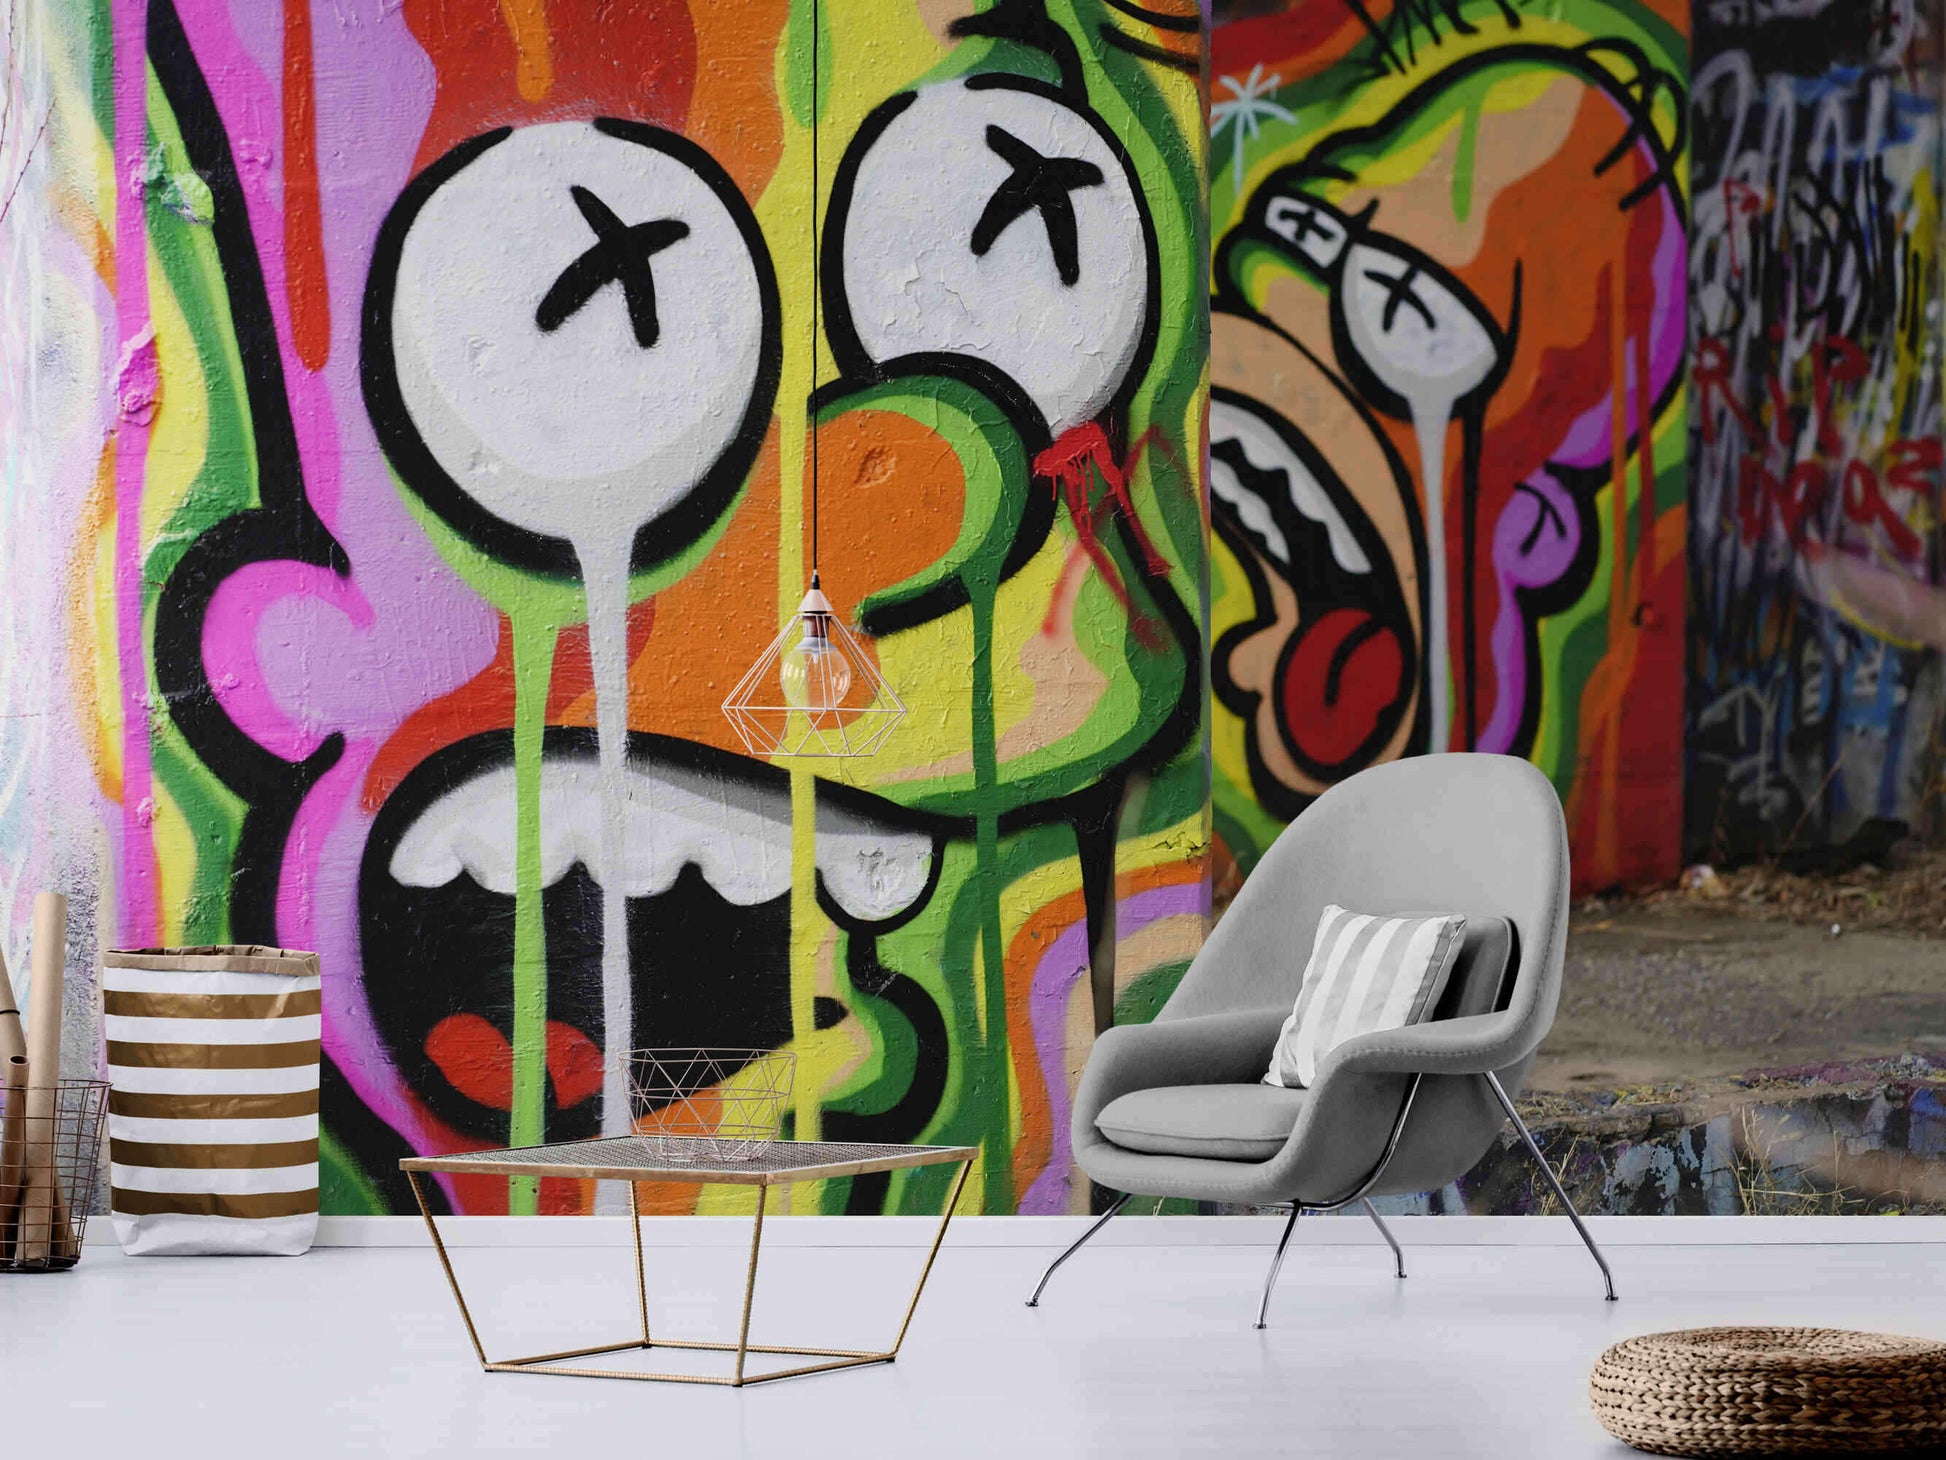 Colorful Peel and Stick Cartoon Graffiti for Creative Spaces